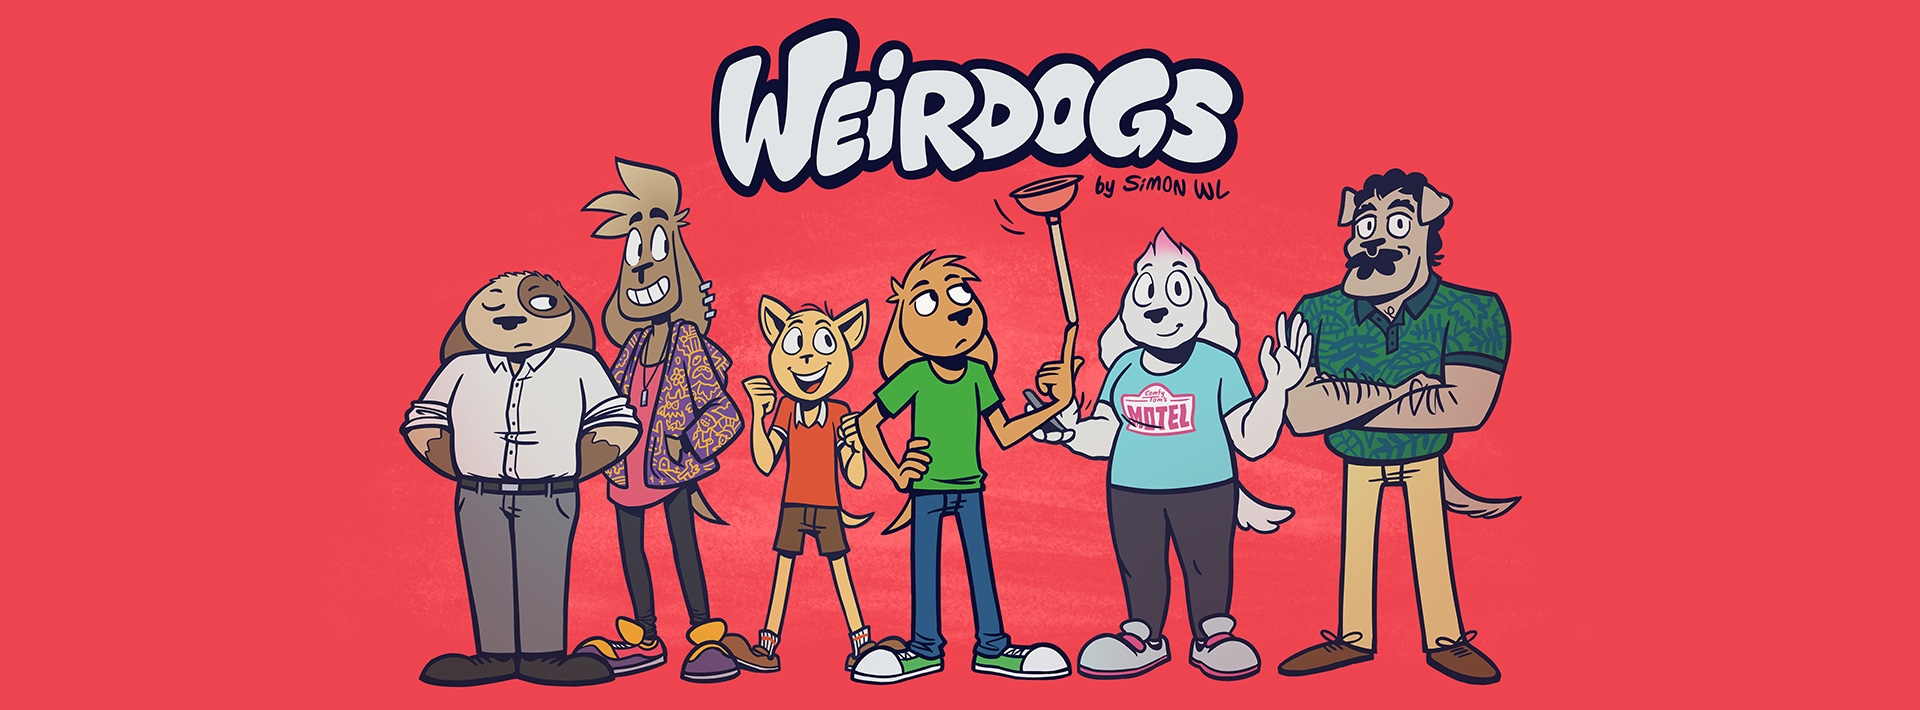 Weirdogs - 01 - The Best Day Ever